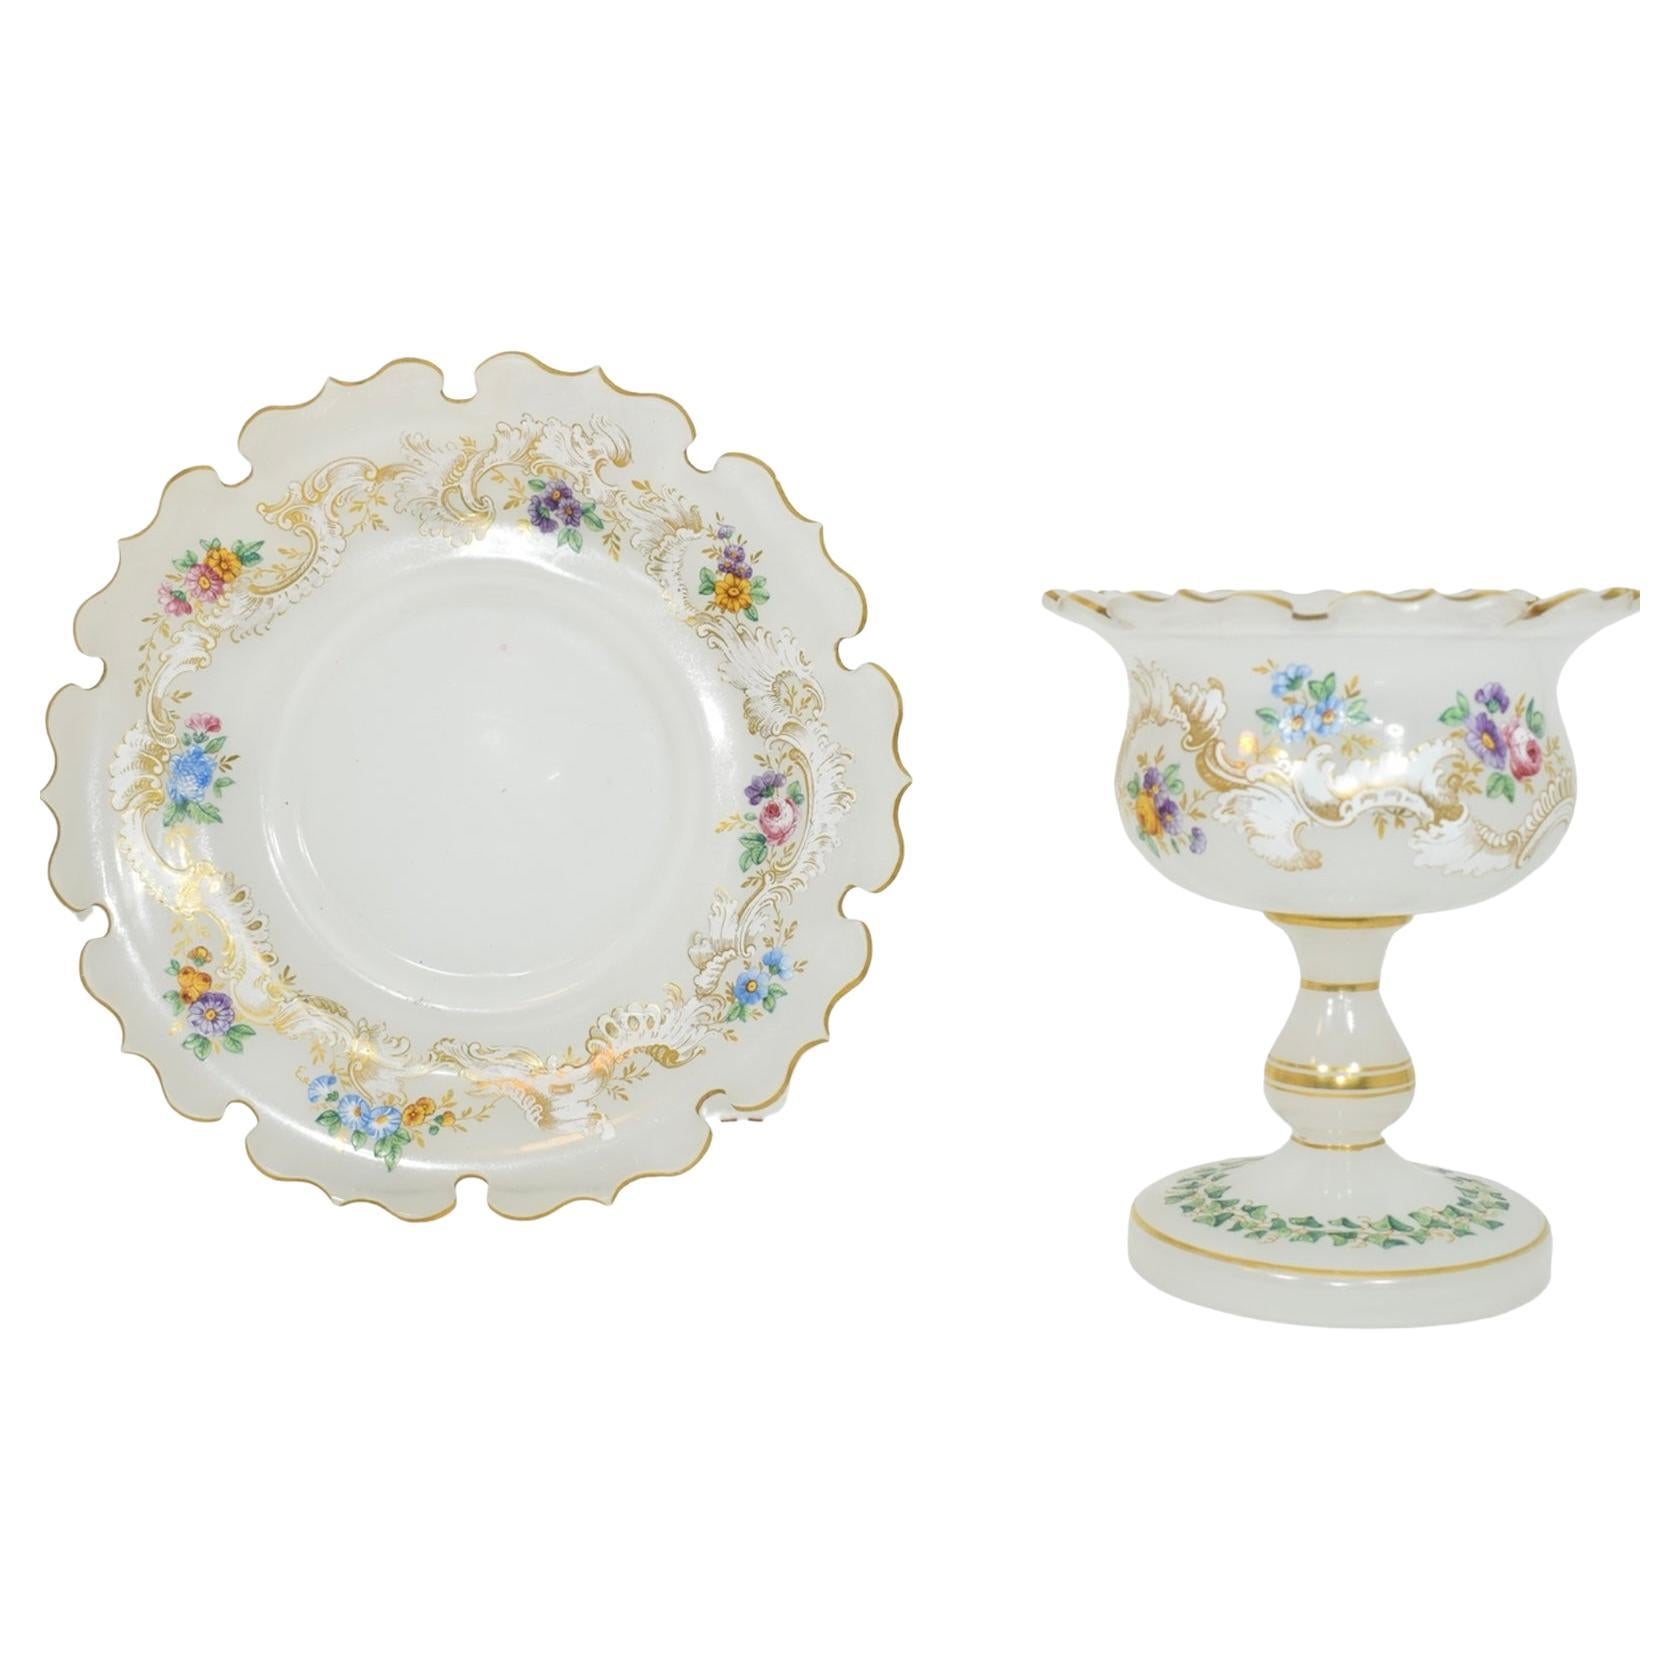 Opaline Glass Antique Opaline Enameled Glass Tazza Bowl and Plate, 19th Century For Sale